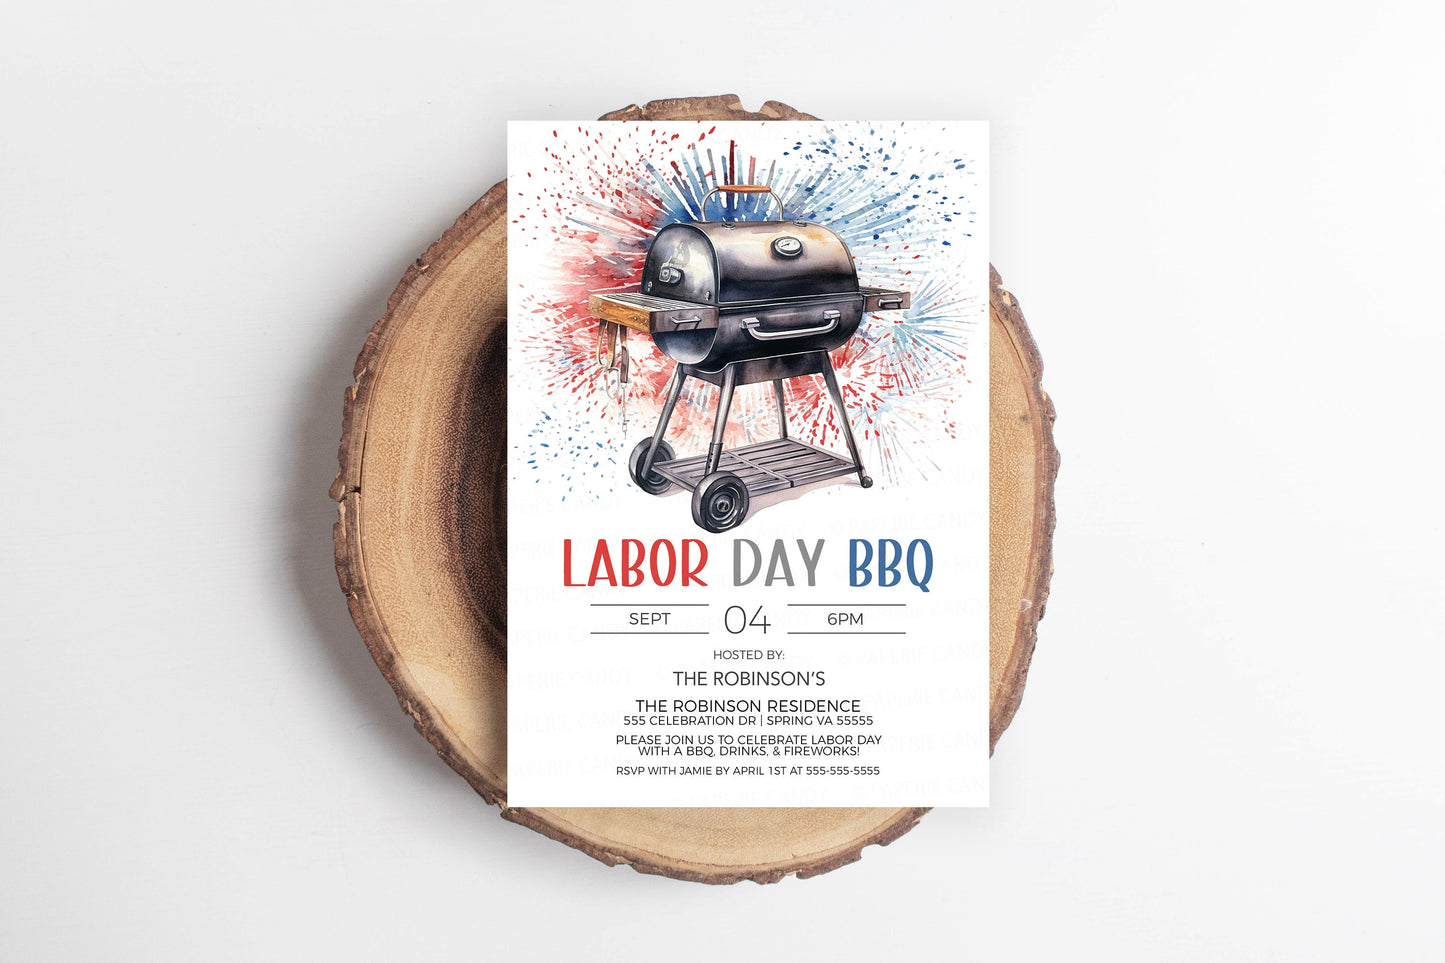 Labor Day BBQ Invitation, Labor Day BBQ Party Invite, Labor Day Cookout Fireworks, Memorial Day, 4th of July Veterans Day, Editable Template